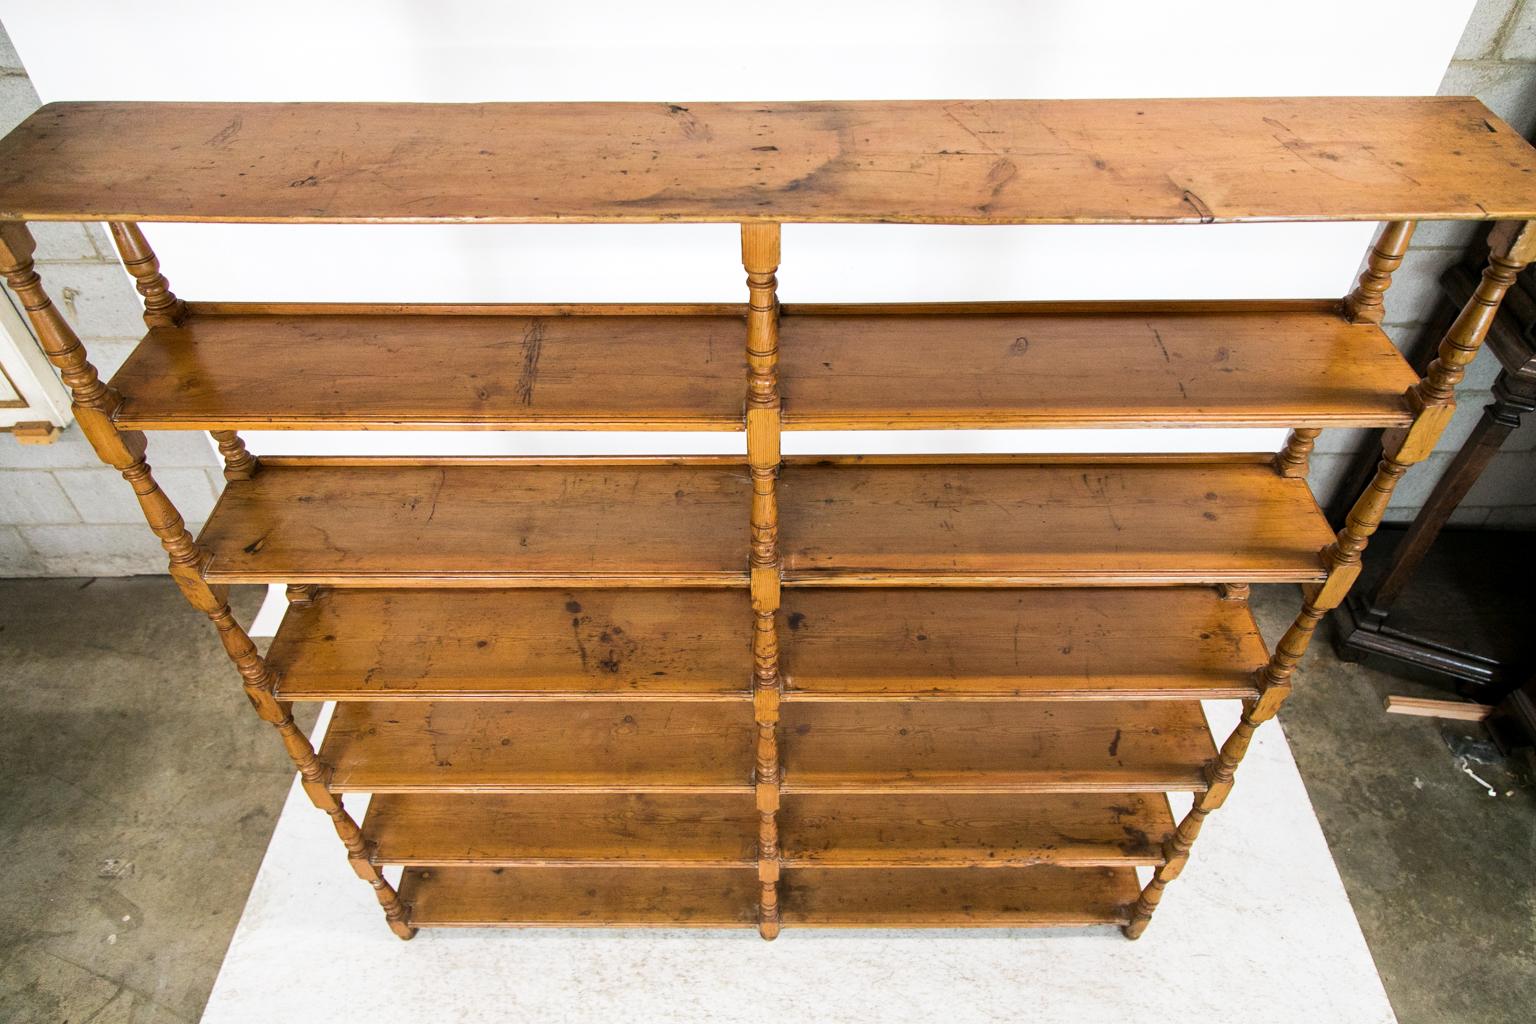 The front shelves of this pine shelf have shaped top edges with a 3/4-inch retaining gallery at the rear. The shelves are supported by six turned supports that are one single length of wood from top to bottom which are on the front and rear.
   